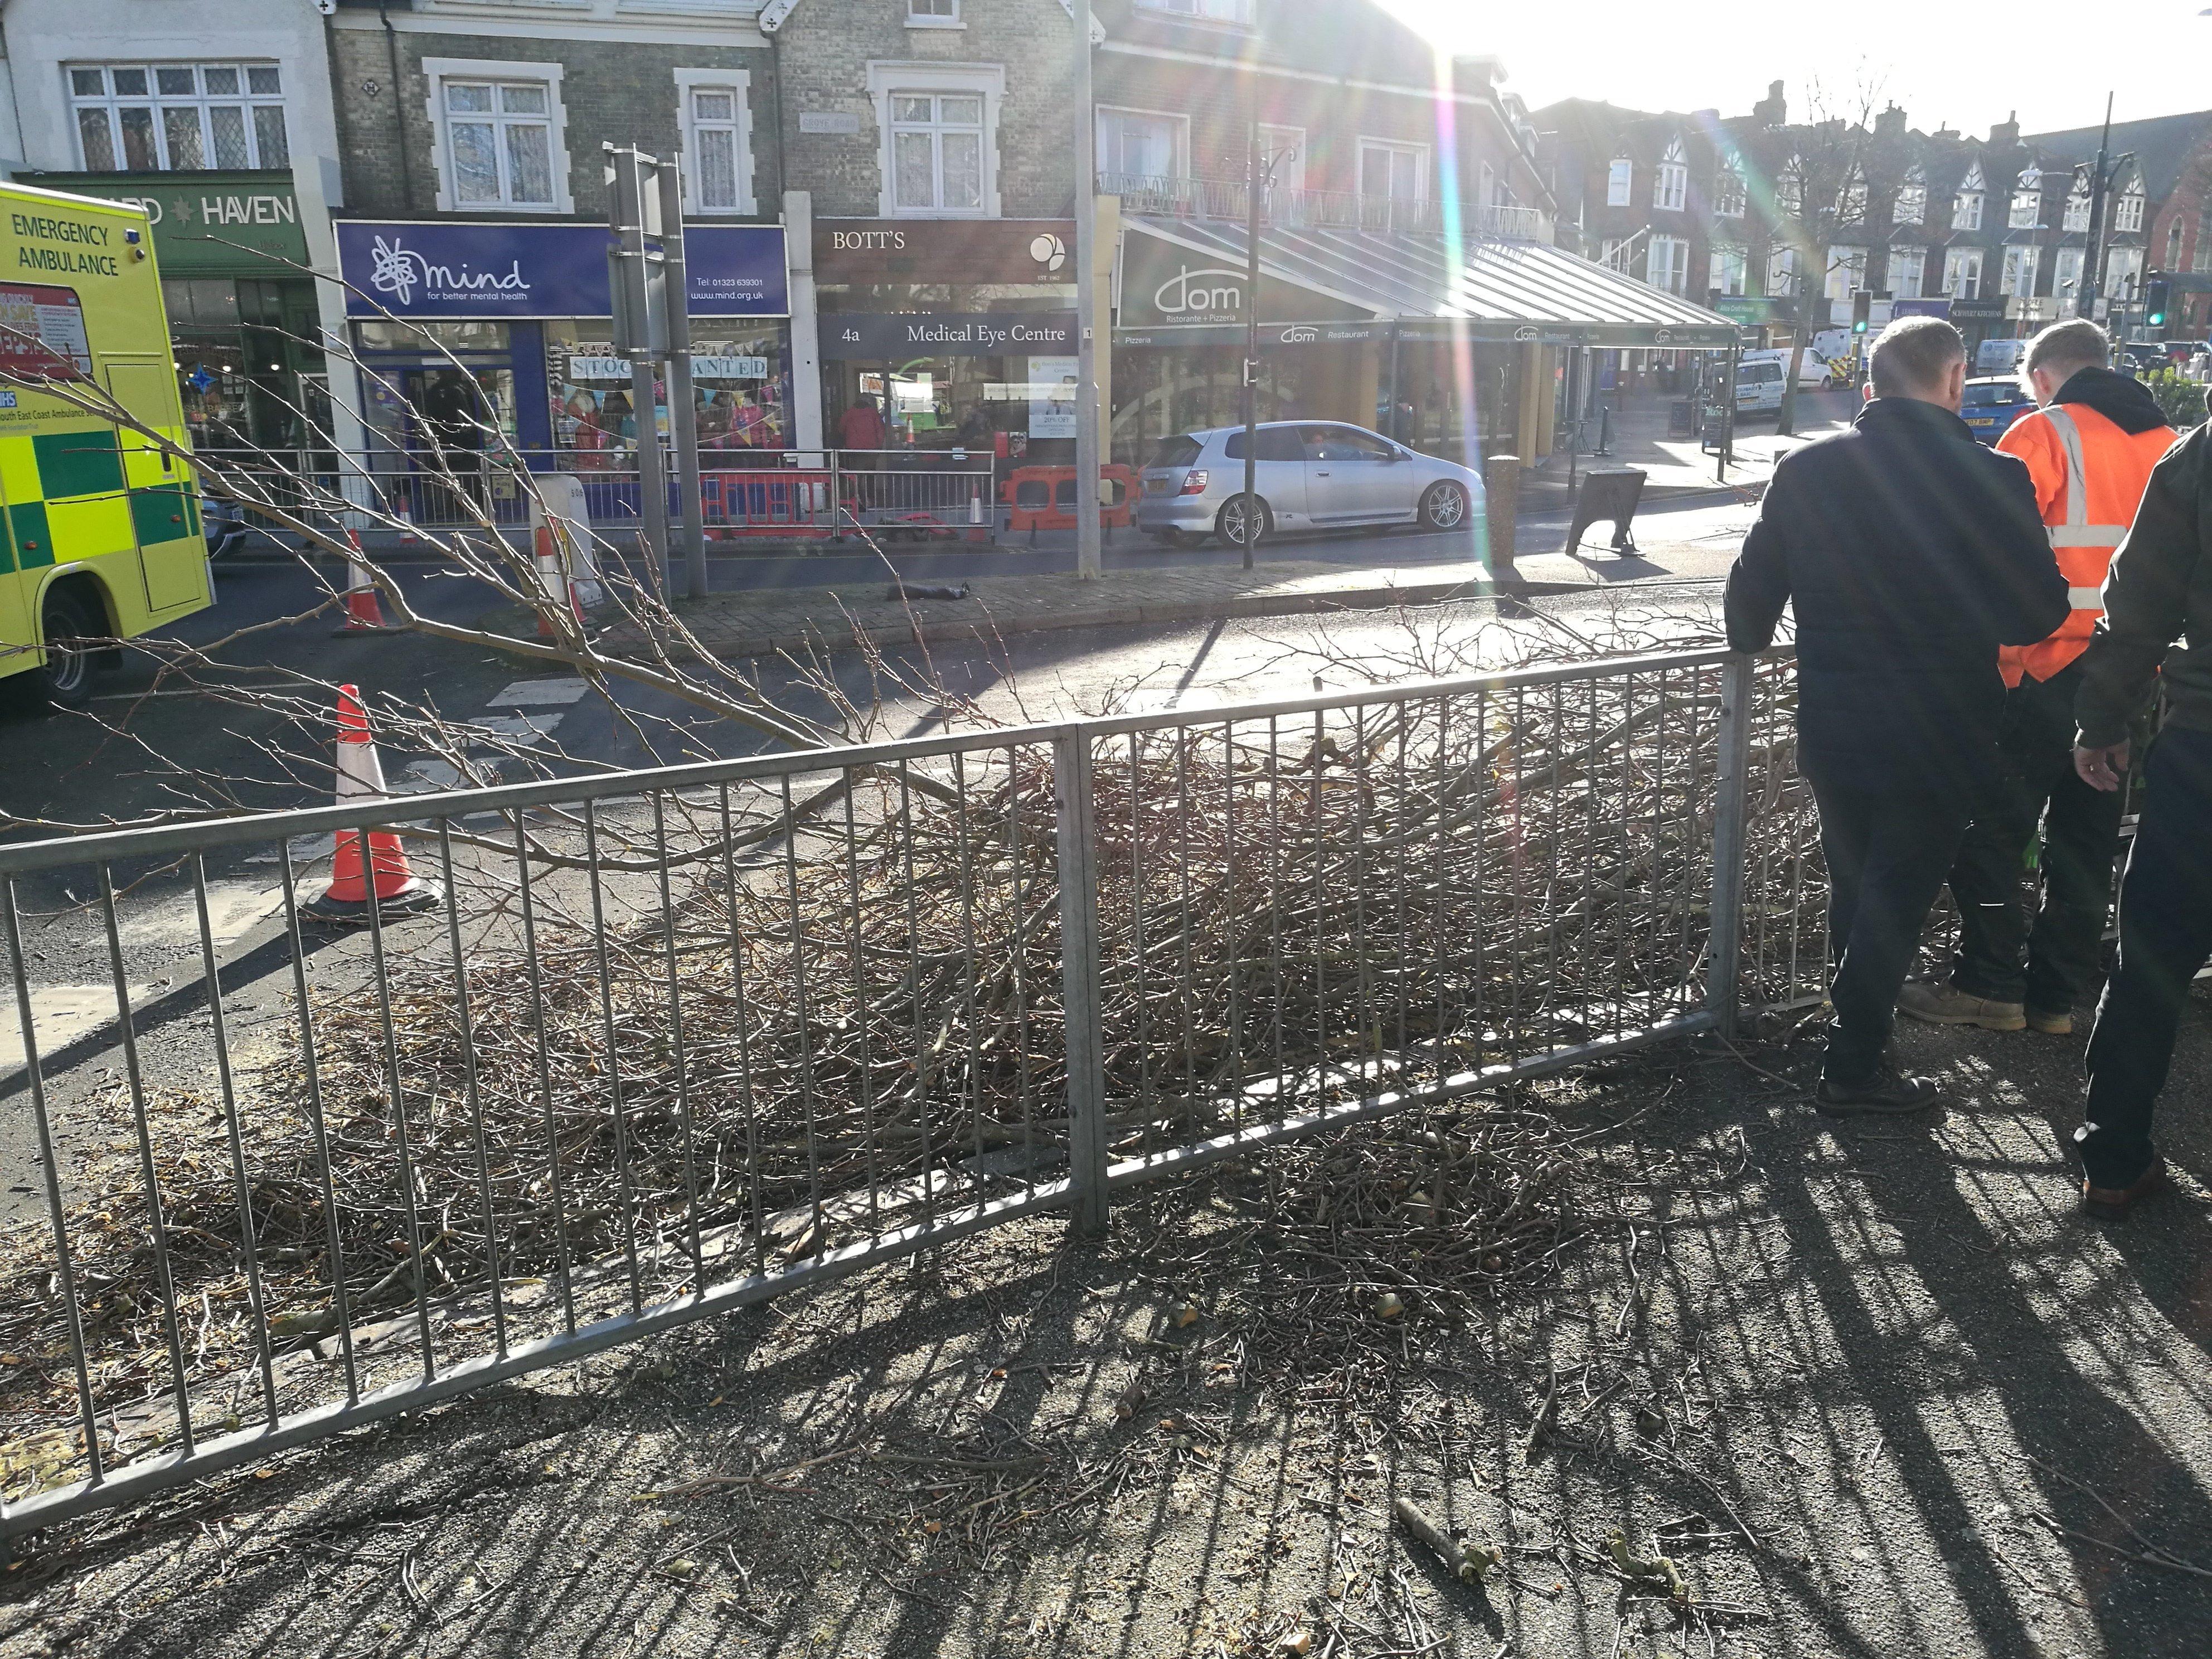 The scene of the accident where the man fell and has "potentially serious" head injuries and was taken to Royal Sussex County Hospital in Brighton